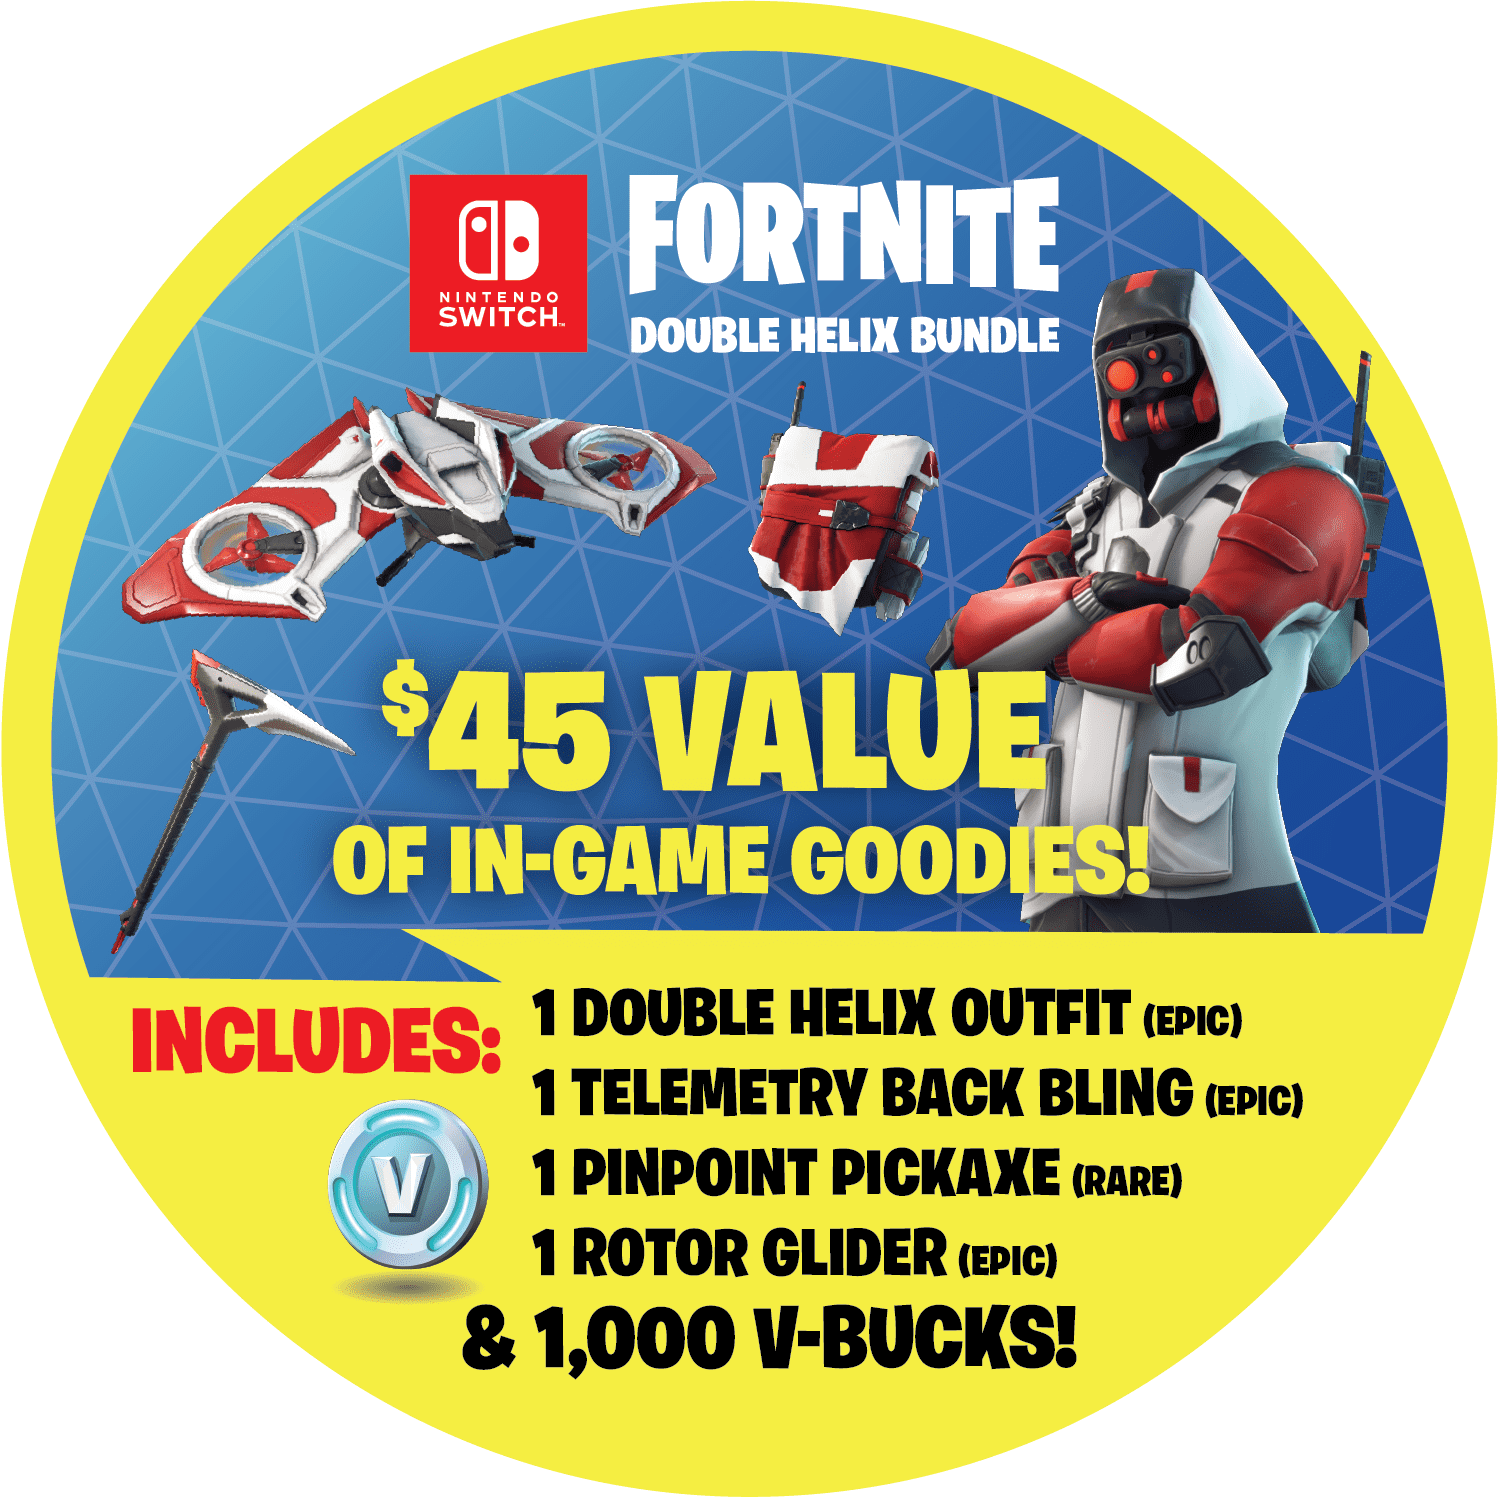 Nintendo Switch Fortnite Double Helix Bundle Gray Walmartcom - toy recall toy hunt for roblox fortnite at walmart unboxing